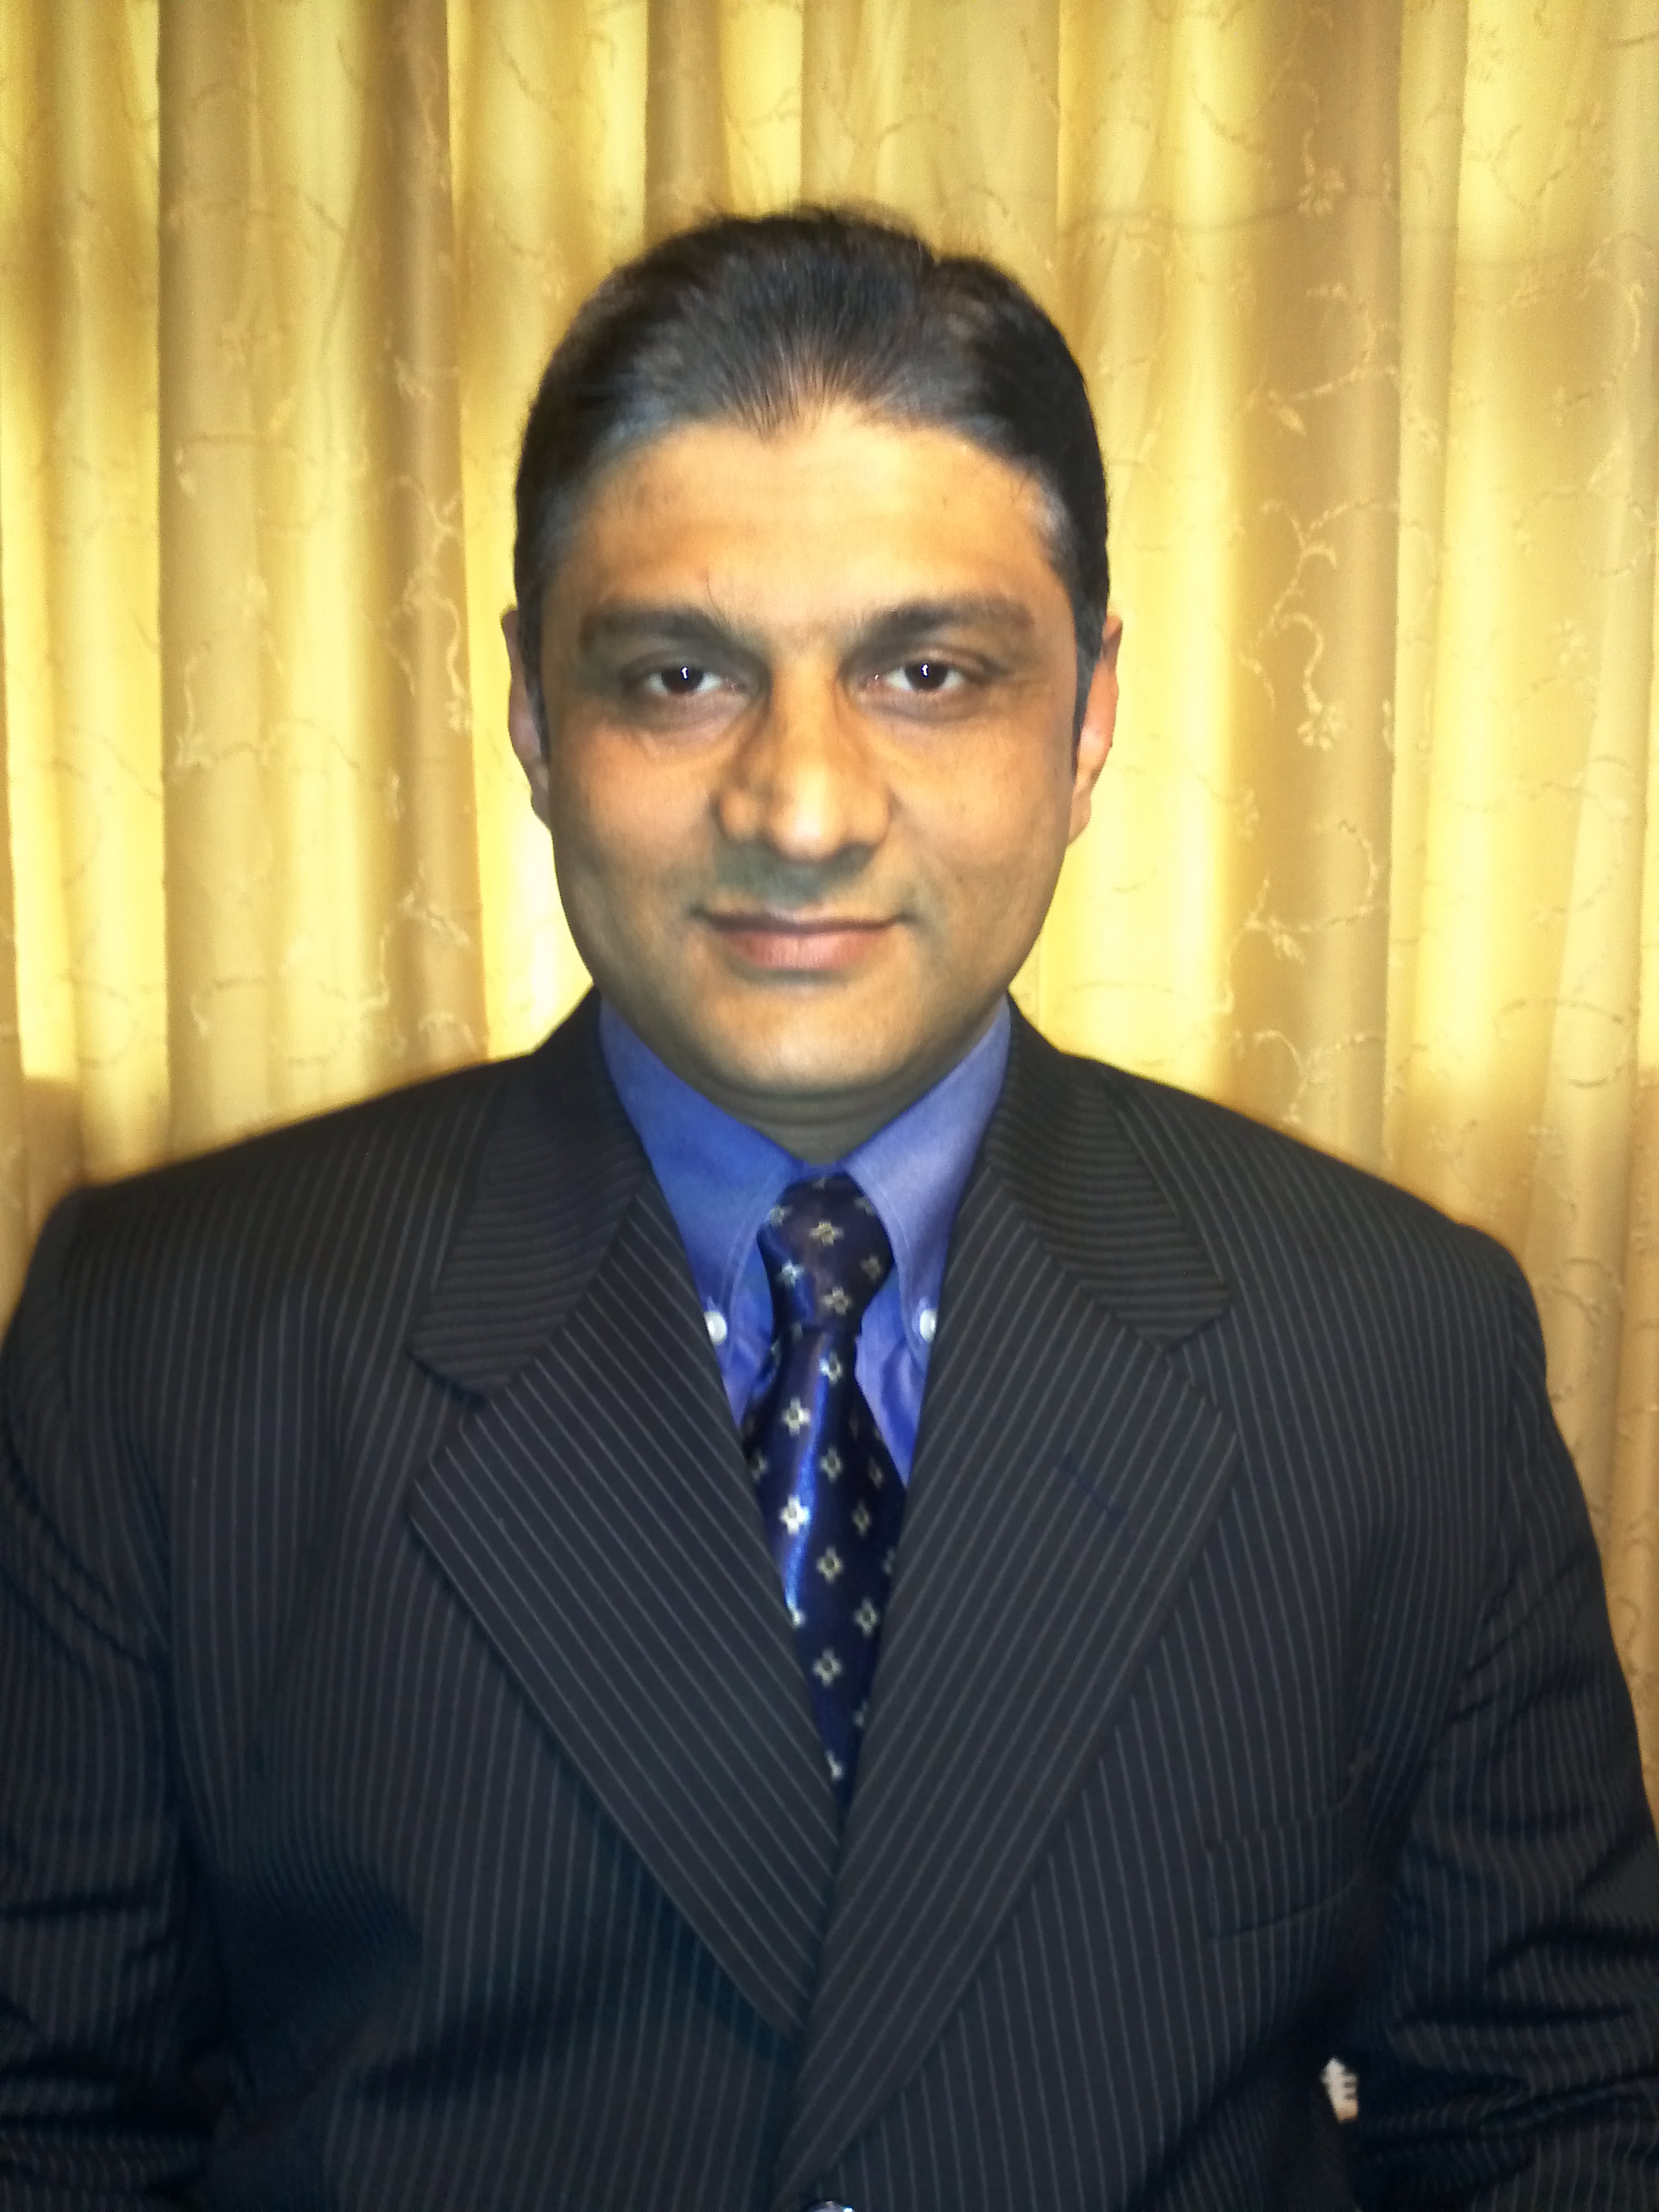 National Truck League Insurance Solutions Appoints Syed Ahmed as Insurance Broker, Protection Specialist